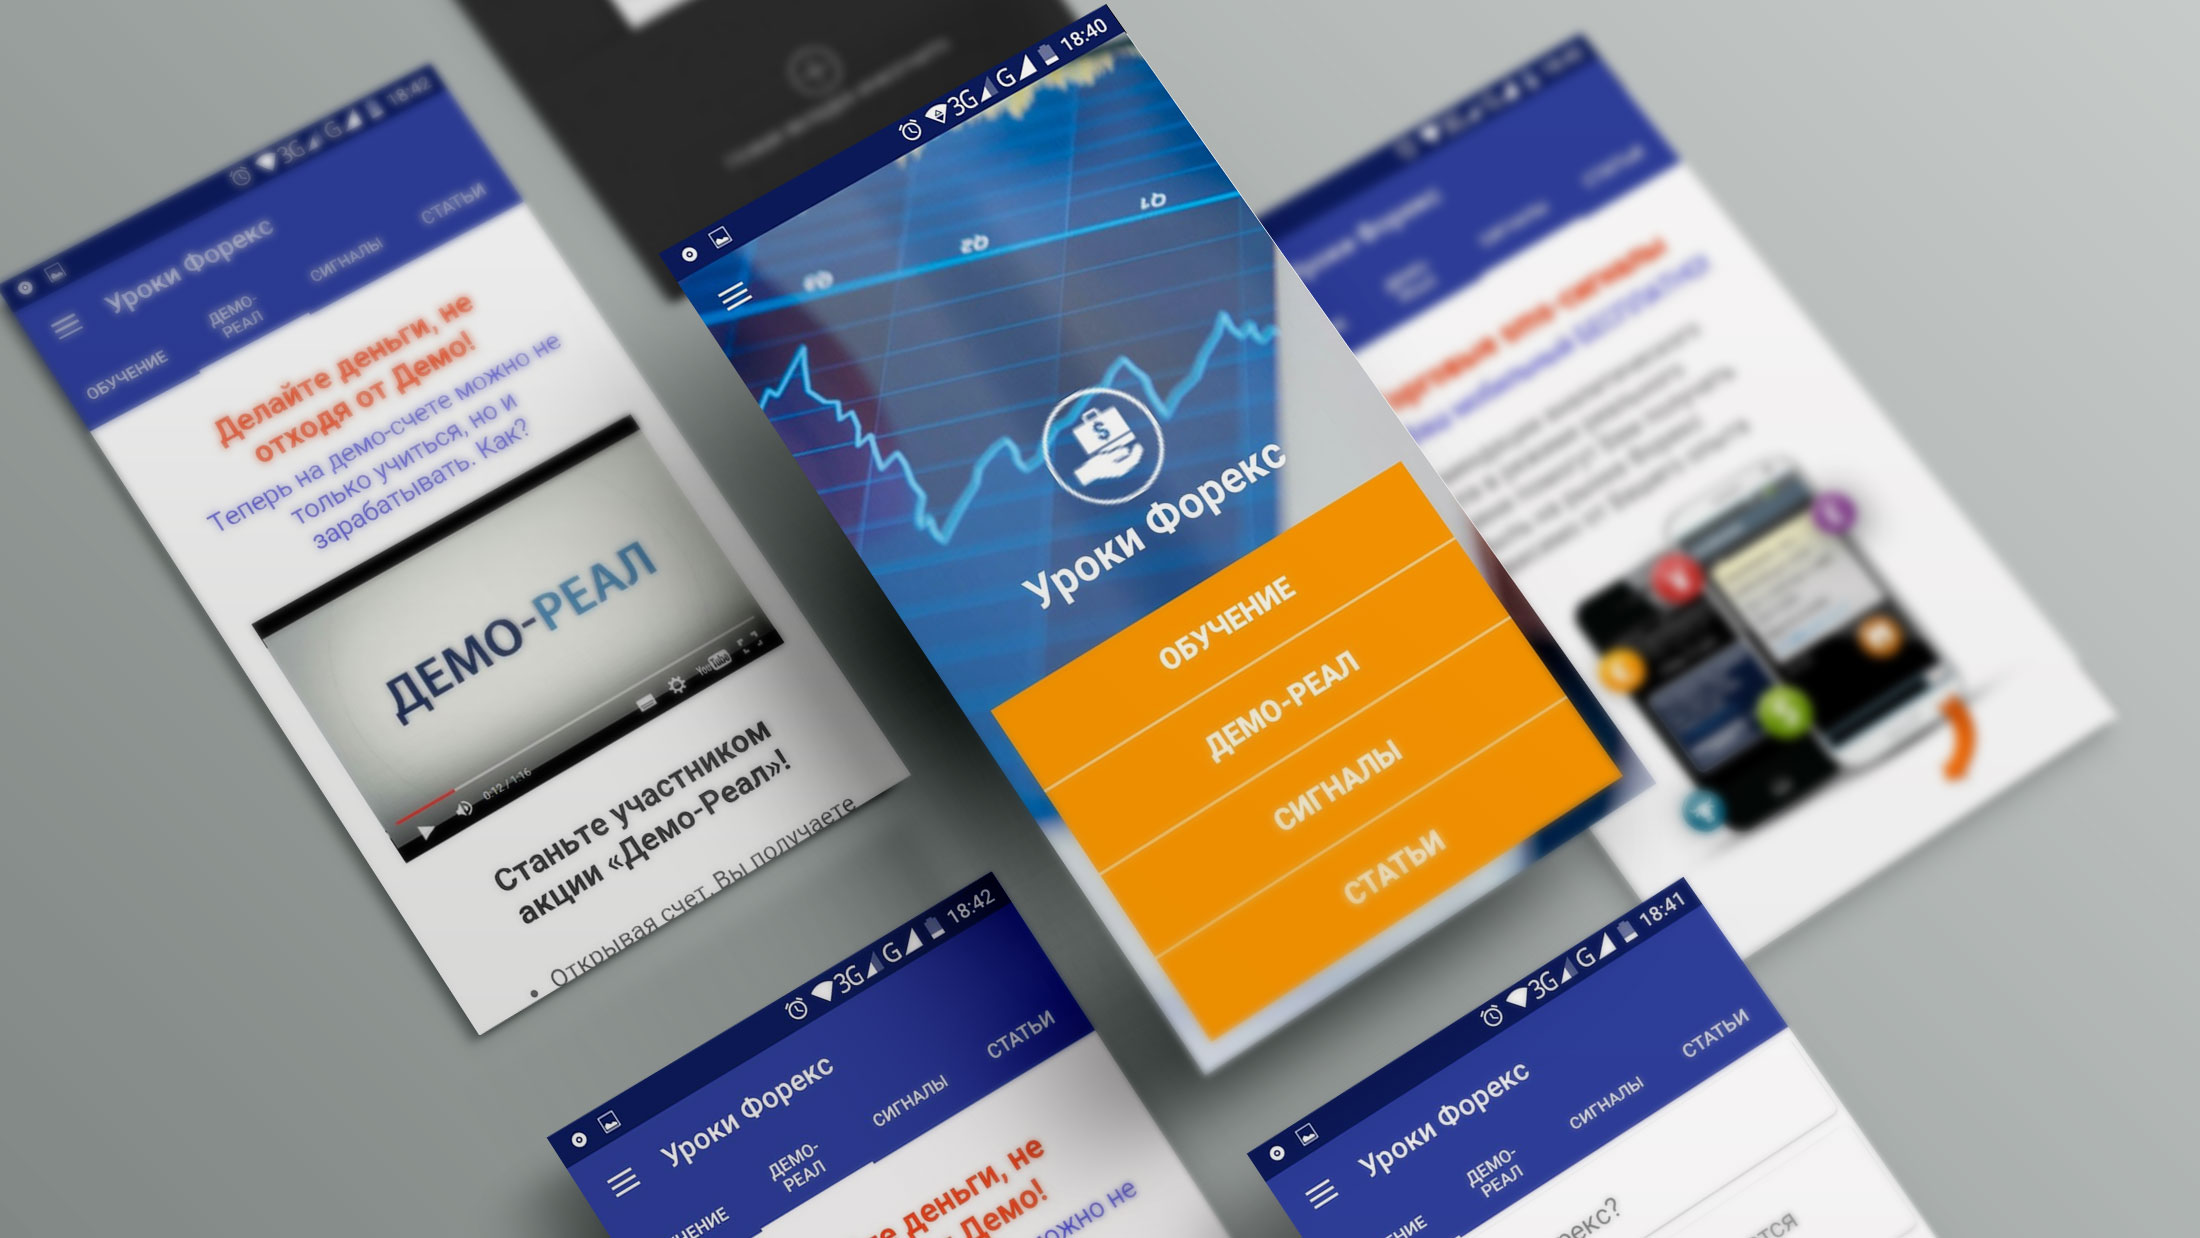 Learn to work in Forex with the Forex Lessons application